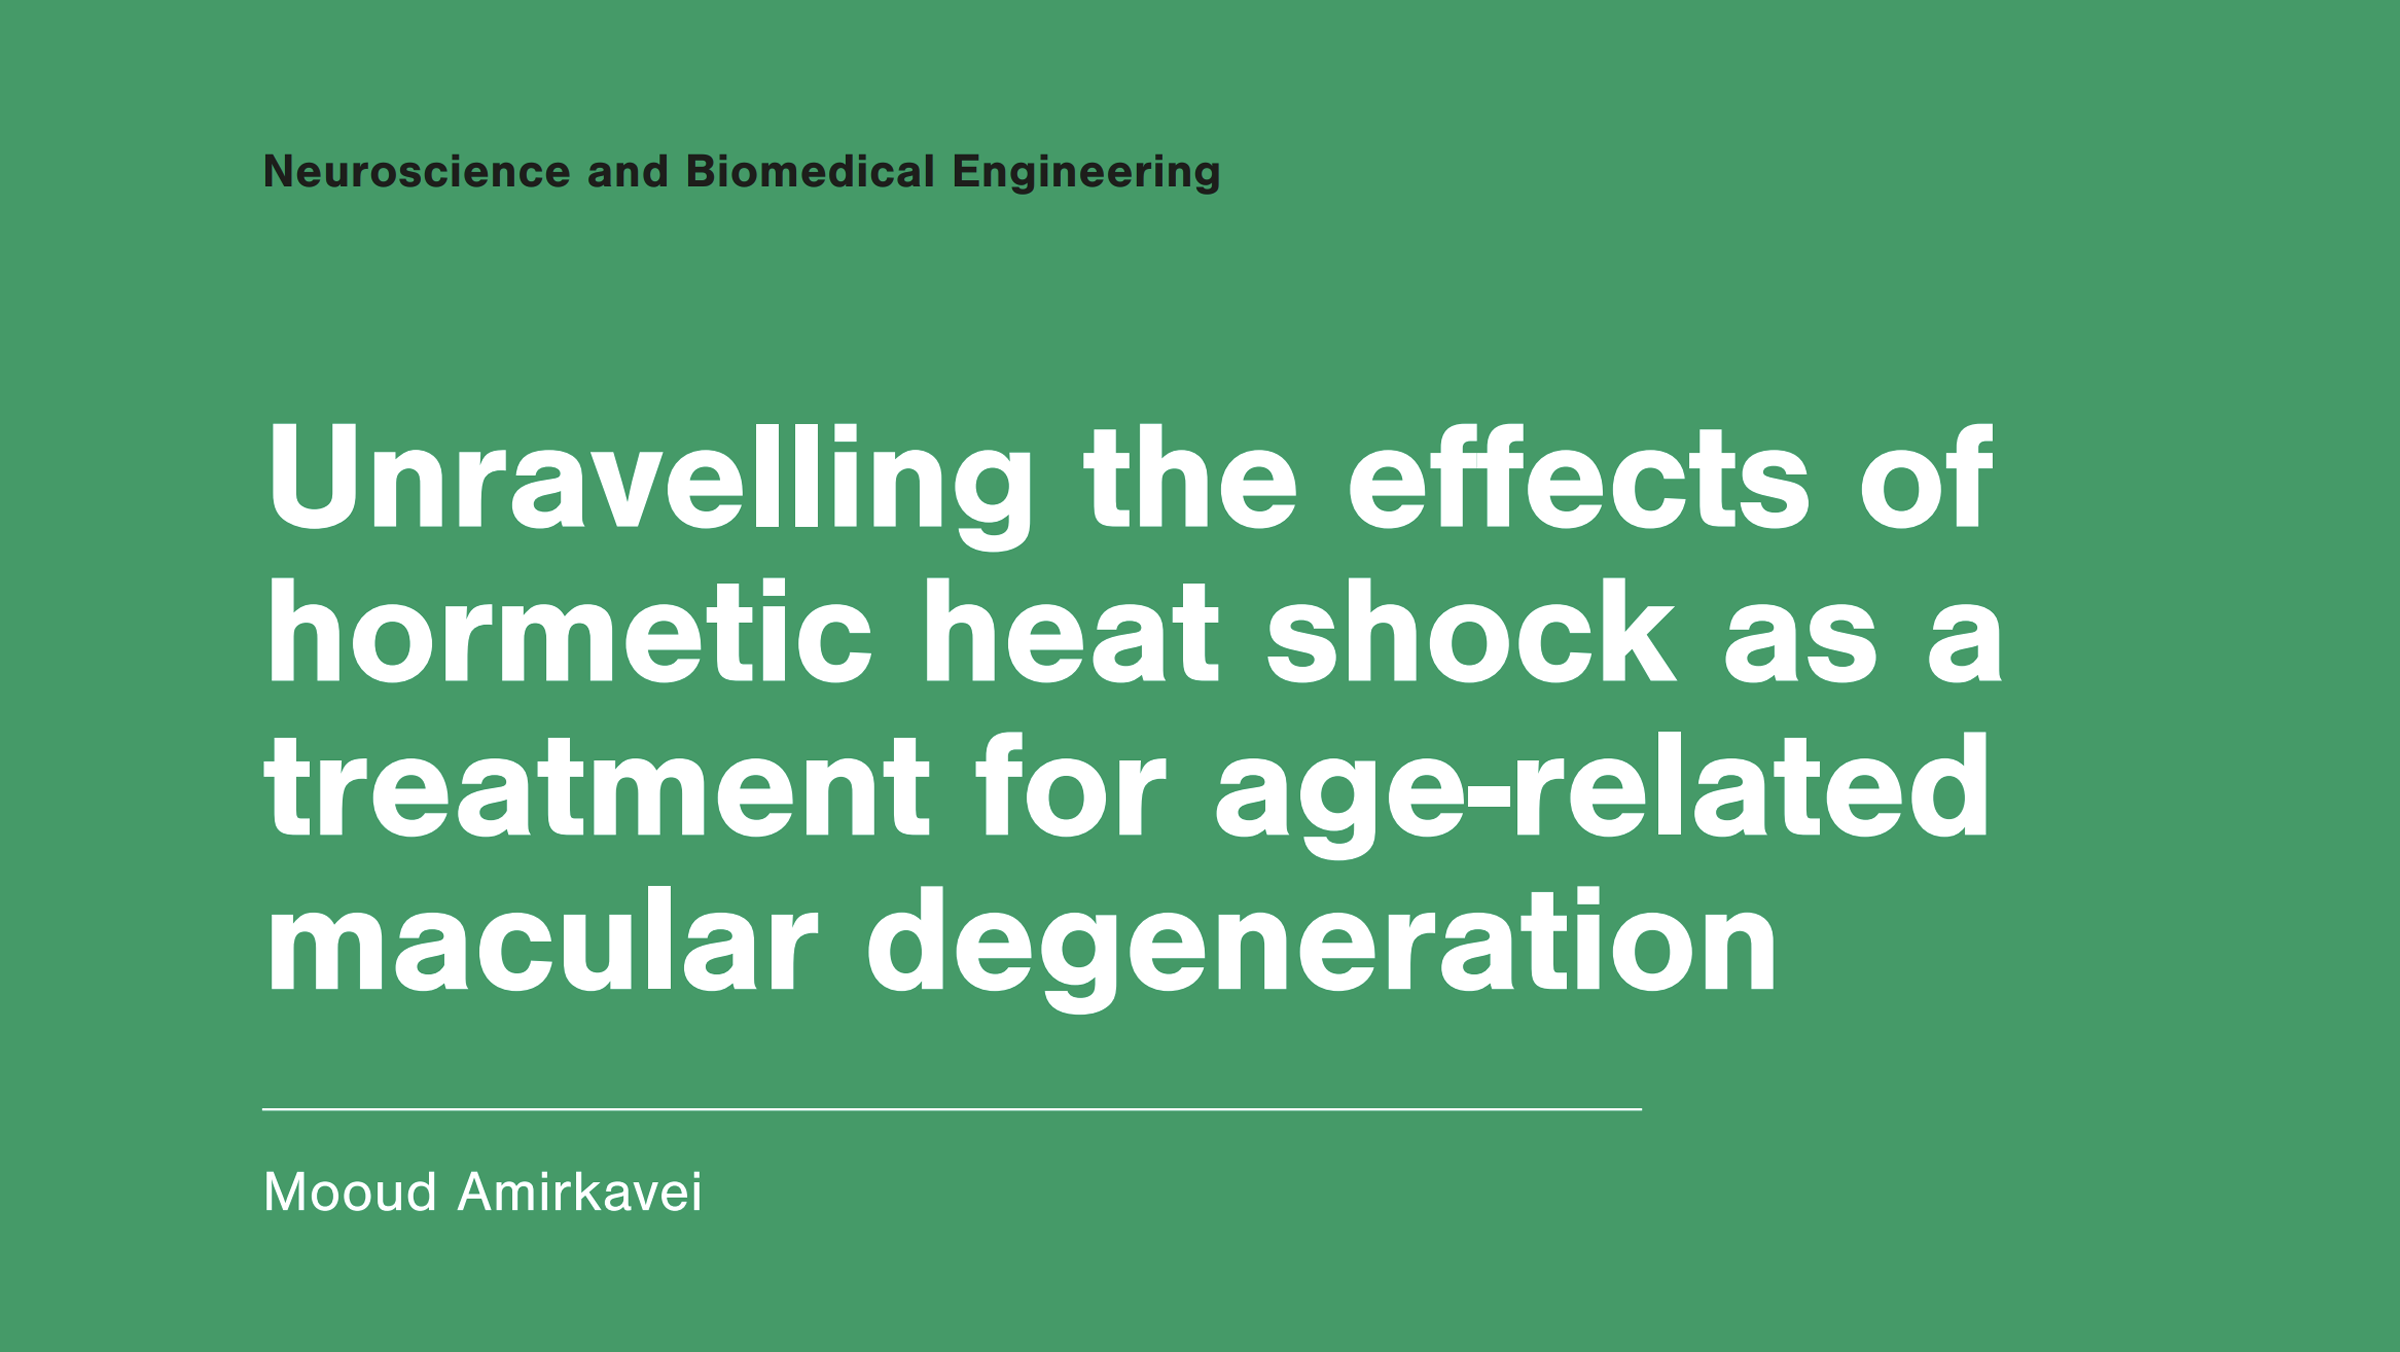 Dissertation sheds light on the effects of hormetic heat on AMD